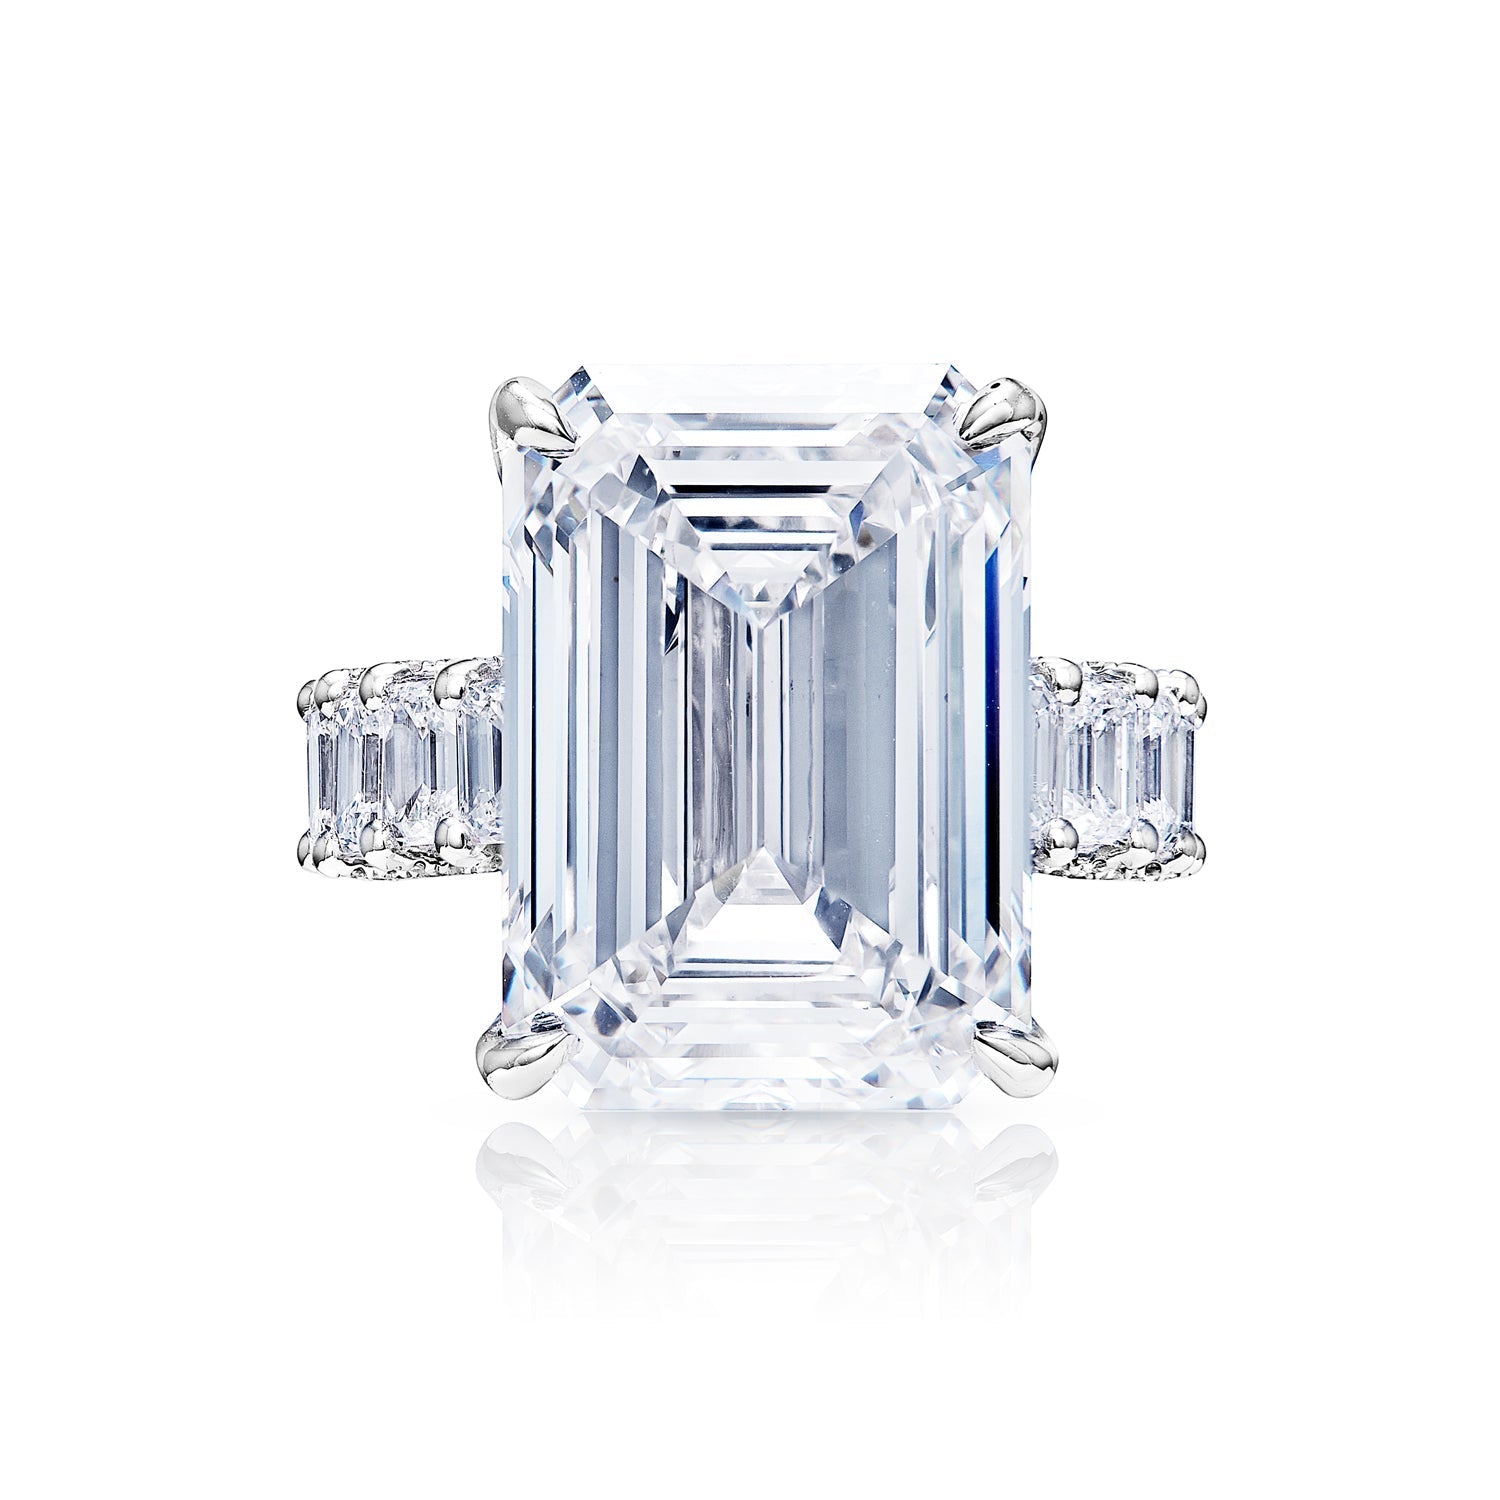 Leia 24 Carat F VS1 Emerald Cut Lab Grown Diamond Engagement Ring in White Gold Front View